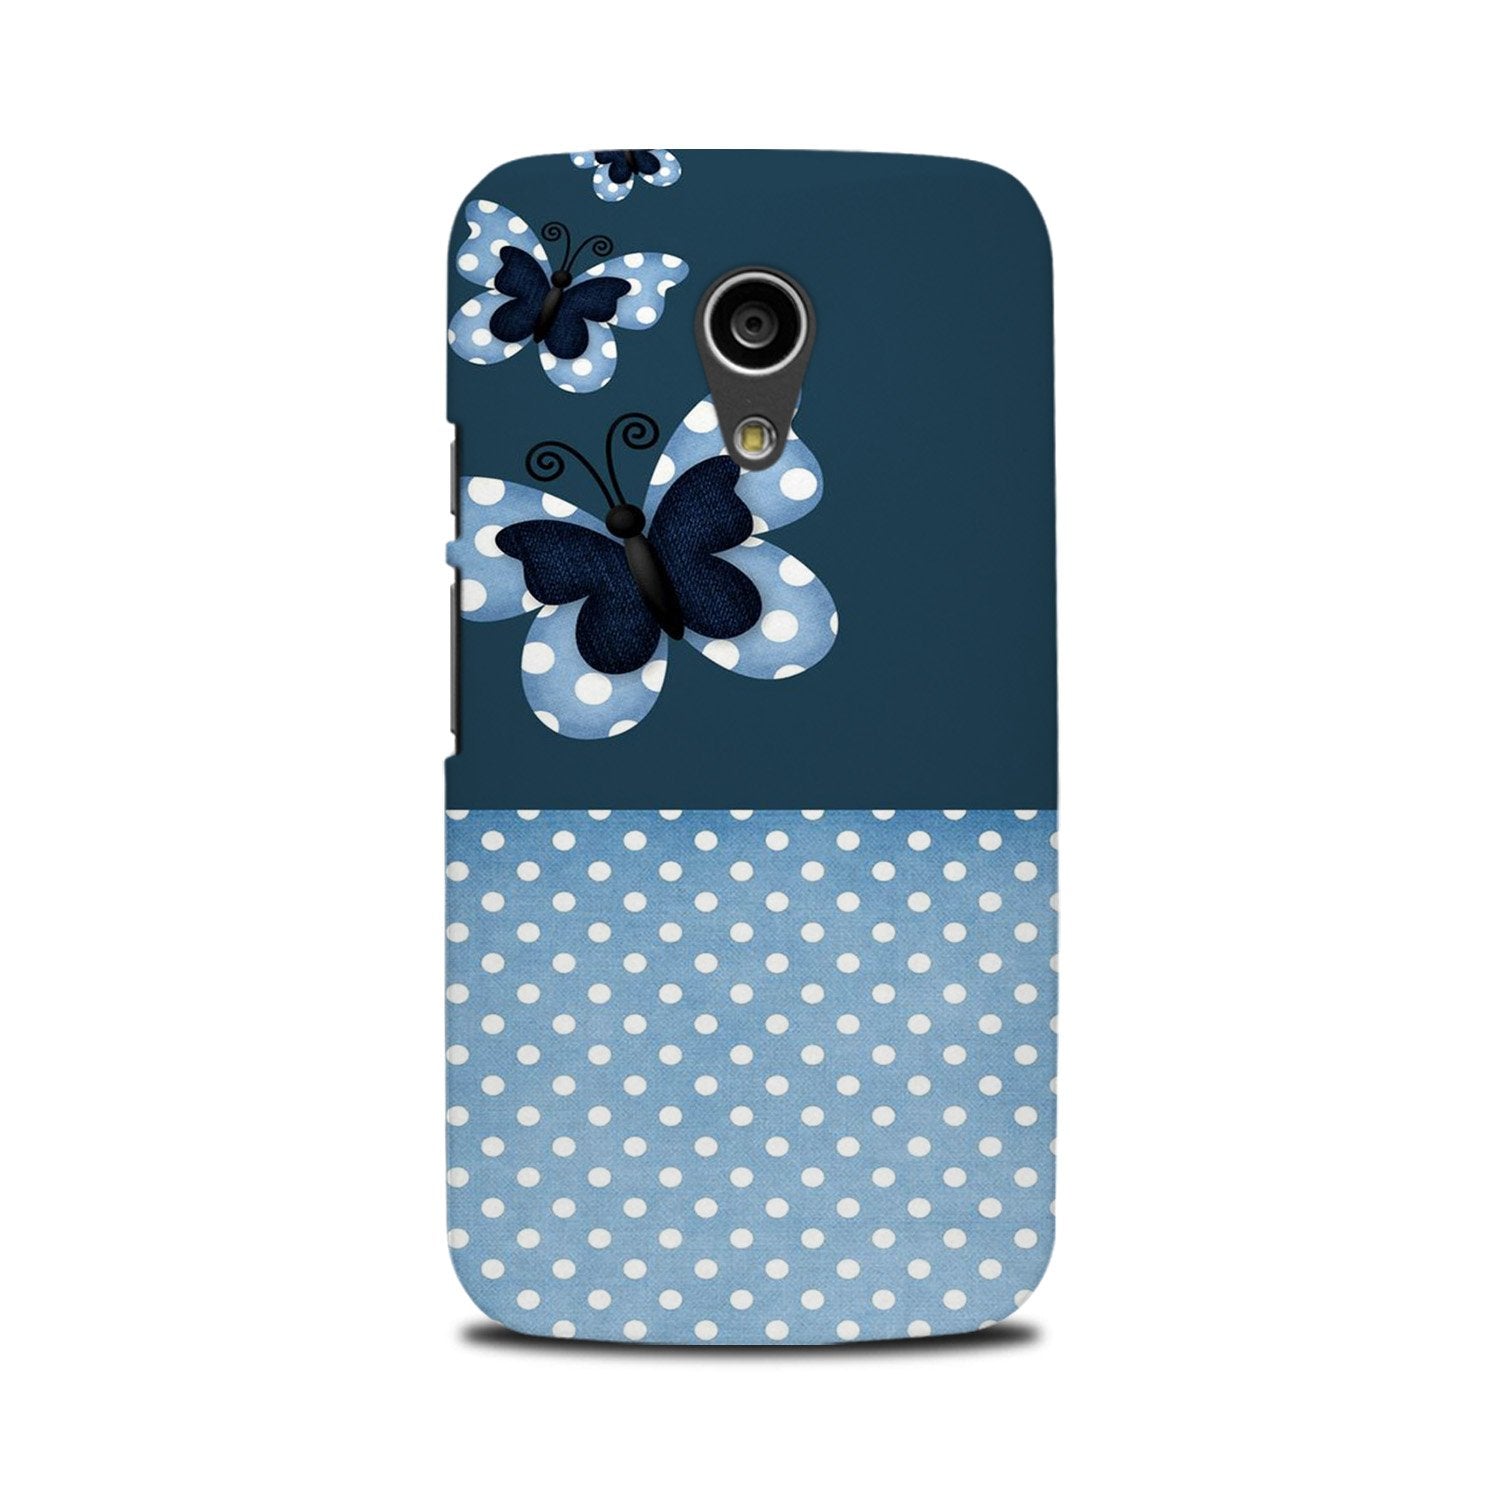 White dots Butterfly Case for Moto G2